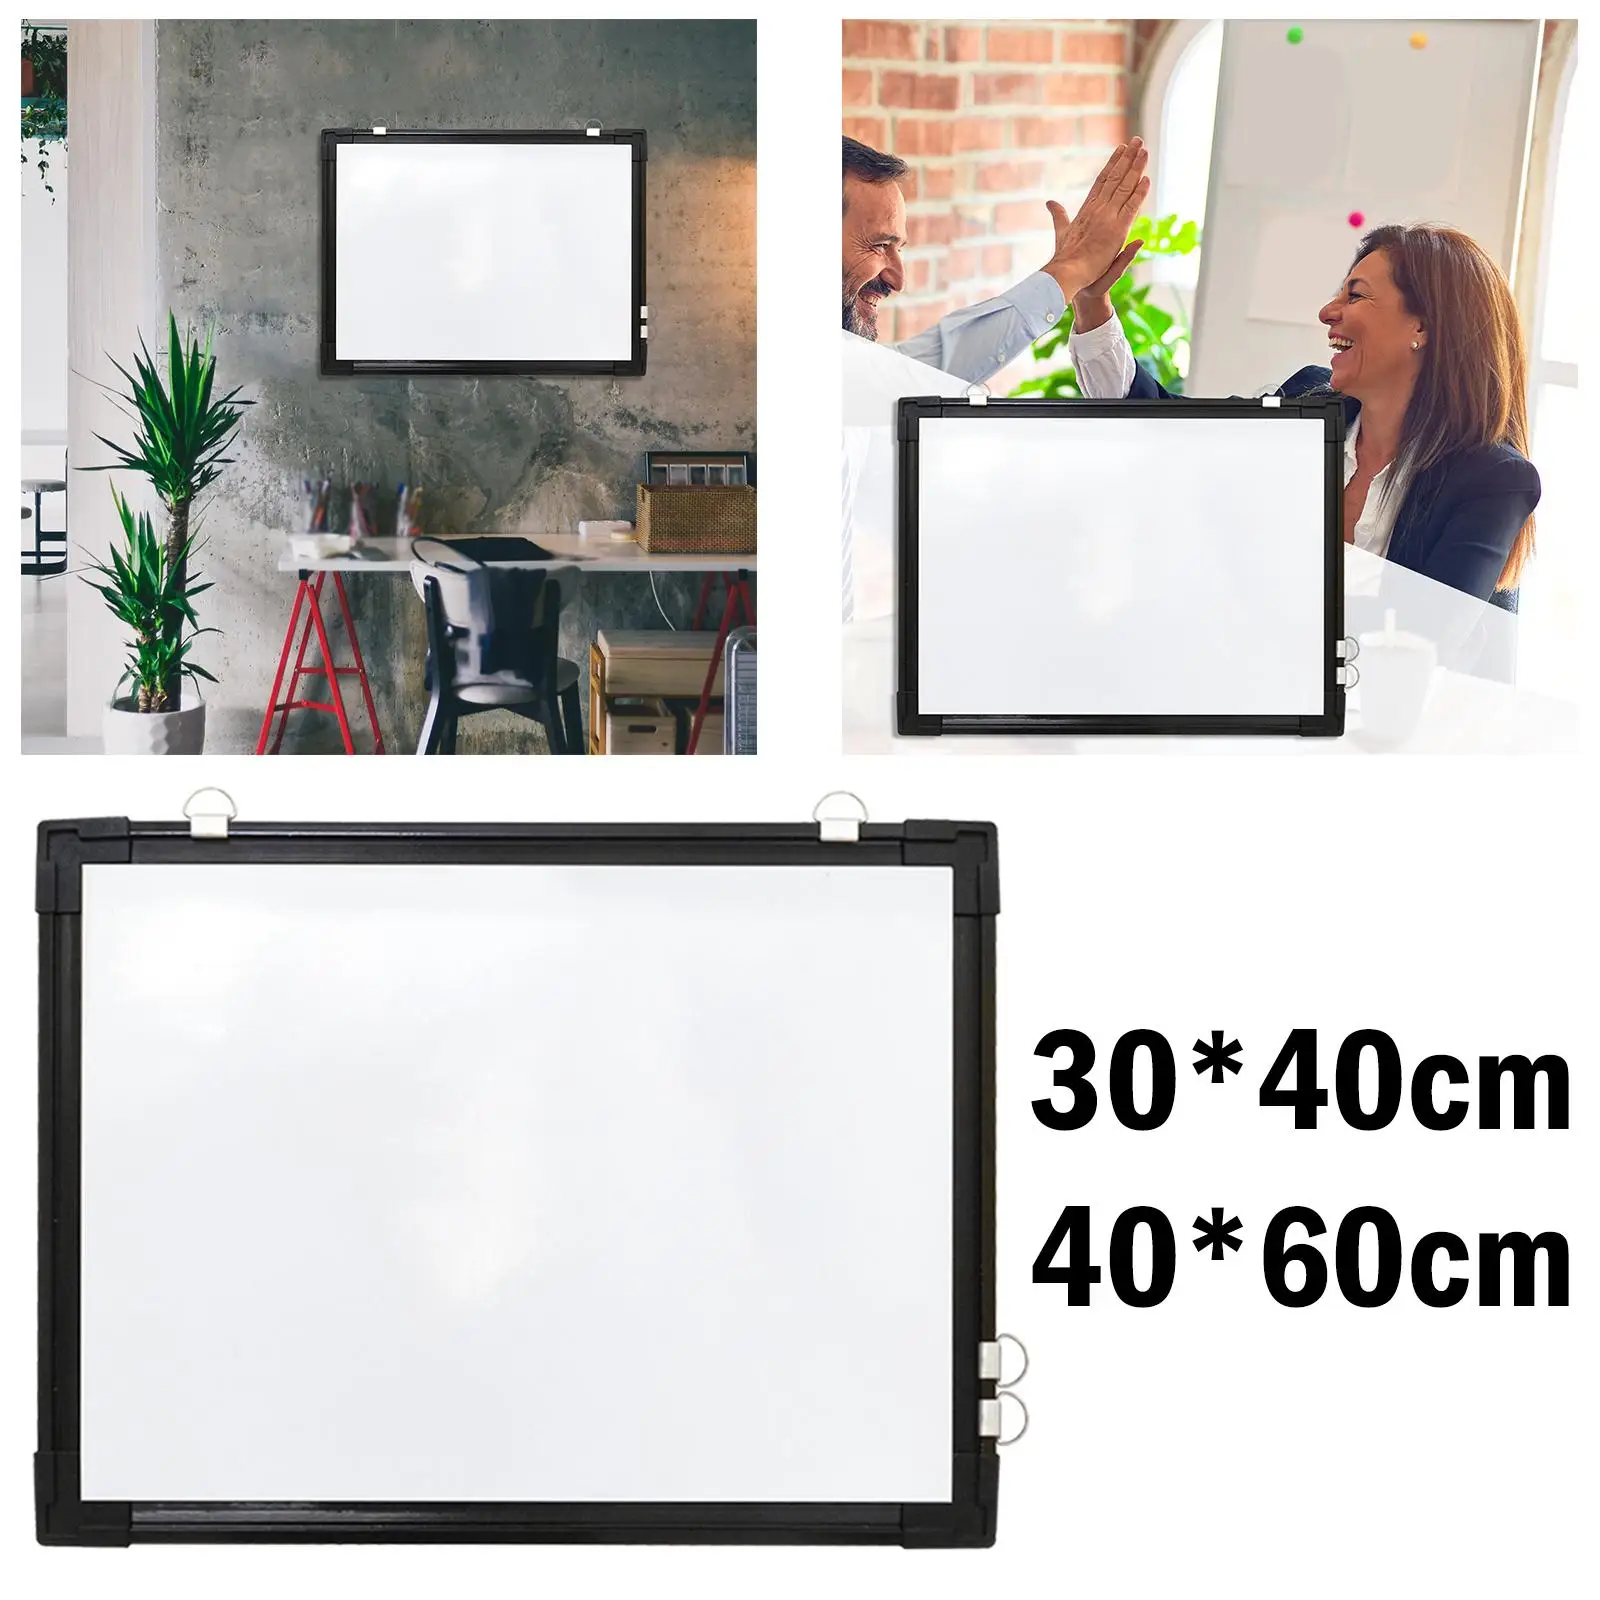 Portable Wall Hanging Whiteboard with r, Markers ,Double Sided Dry White Boards for Door Teaching List